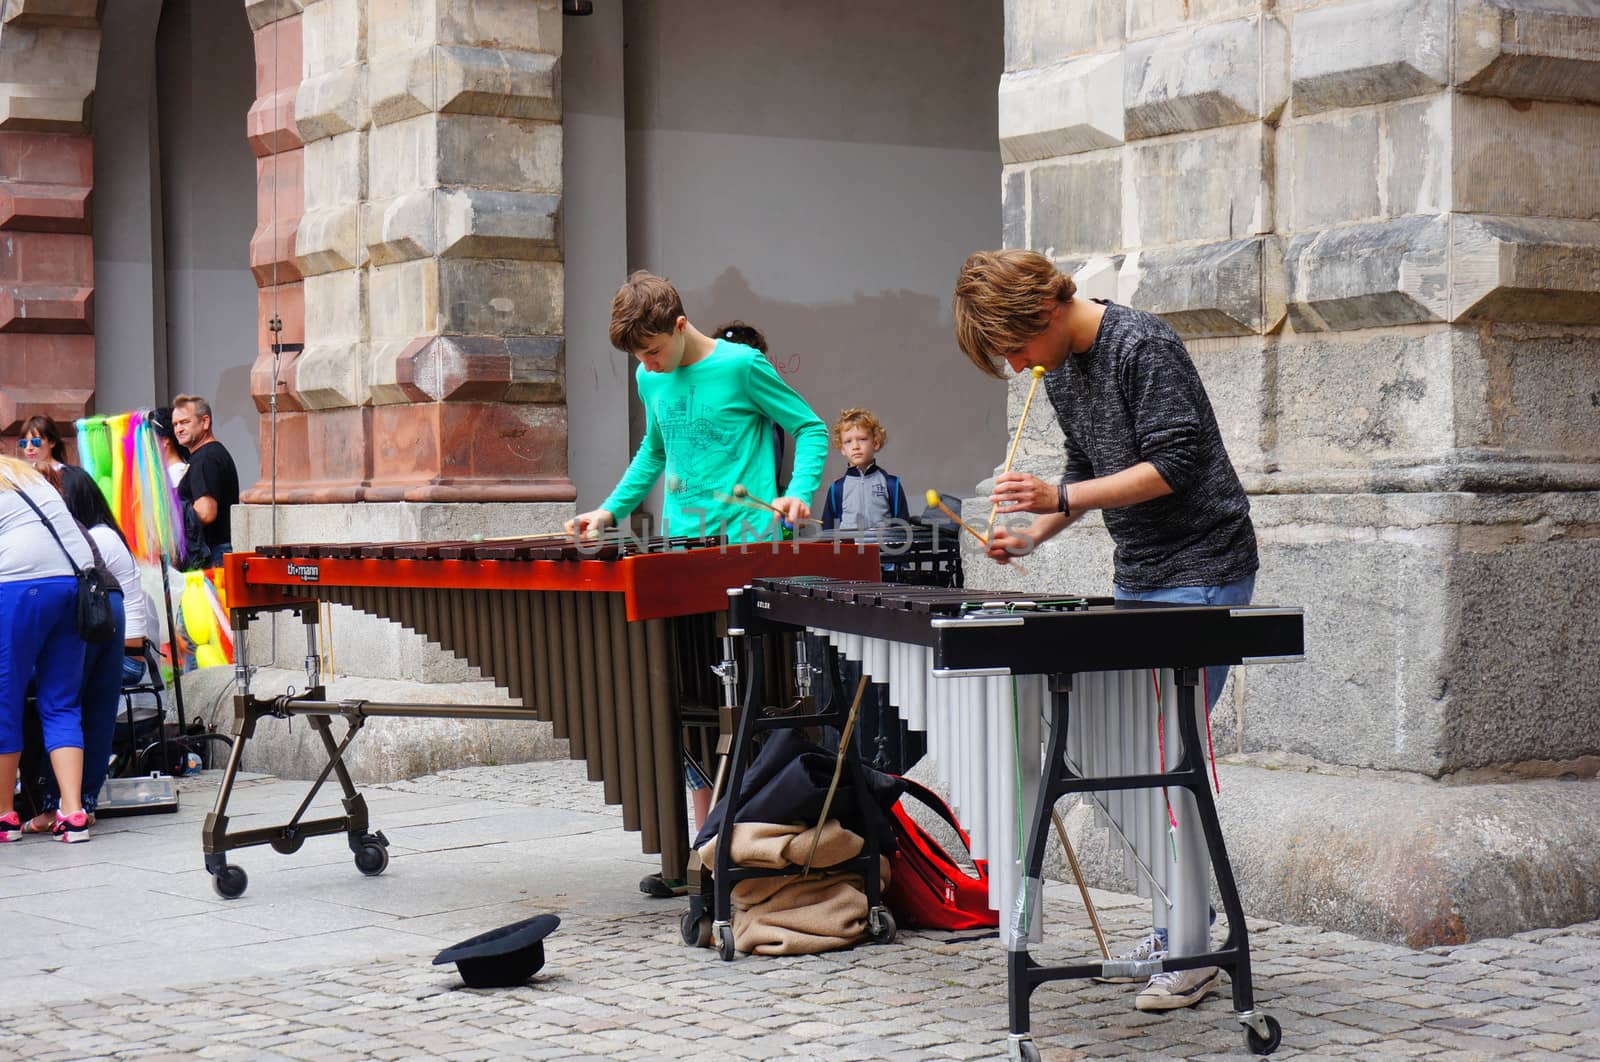 GDANSK, POLAND - JULY 29, 2015: Two young men playing instruments at the city center